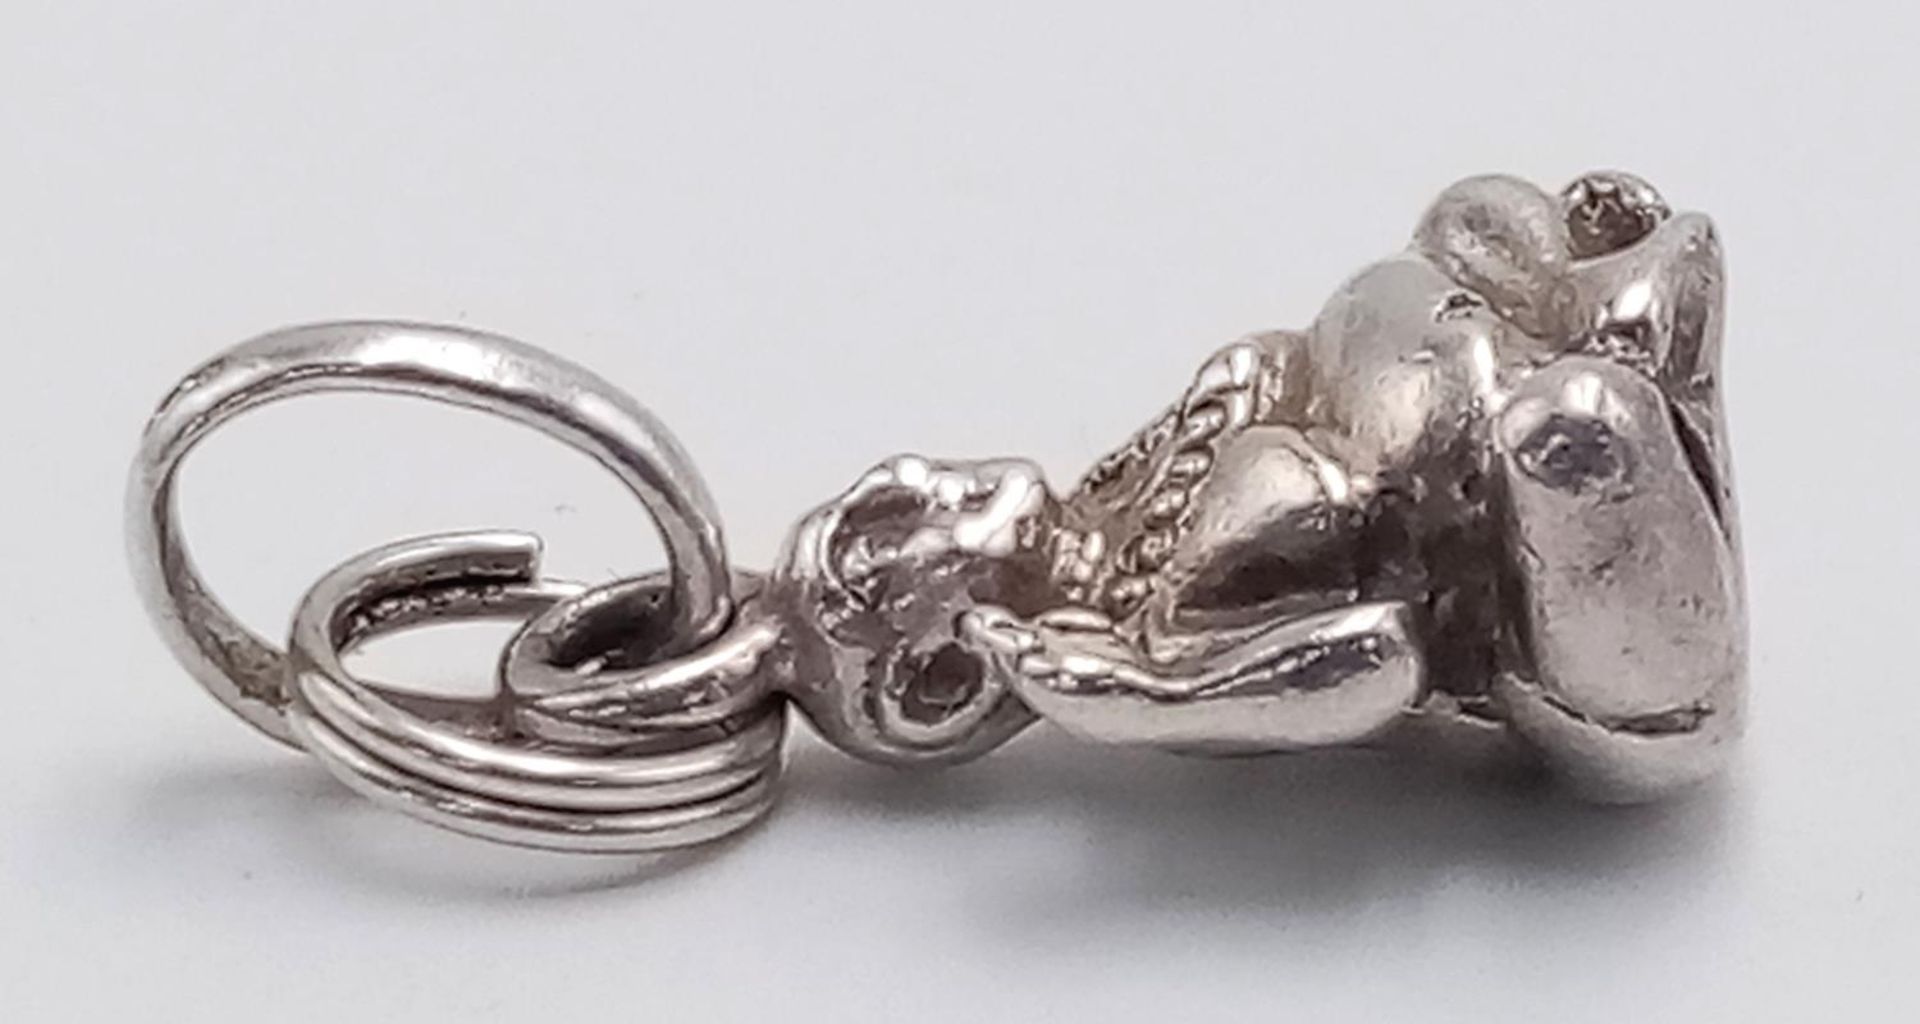 A STERLING SILVER LINKS OF LONDON BUDHA CHARM 5.6G , approx 3cm x 1cm. SC 9089 - Image 3 of 4